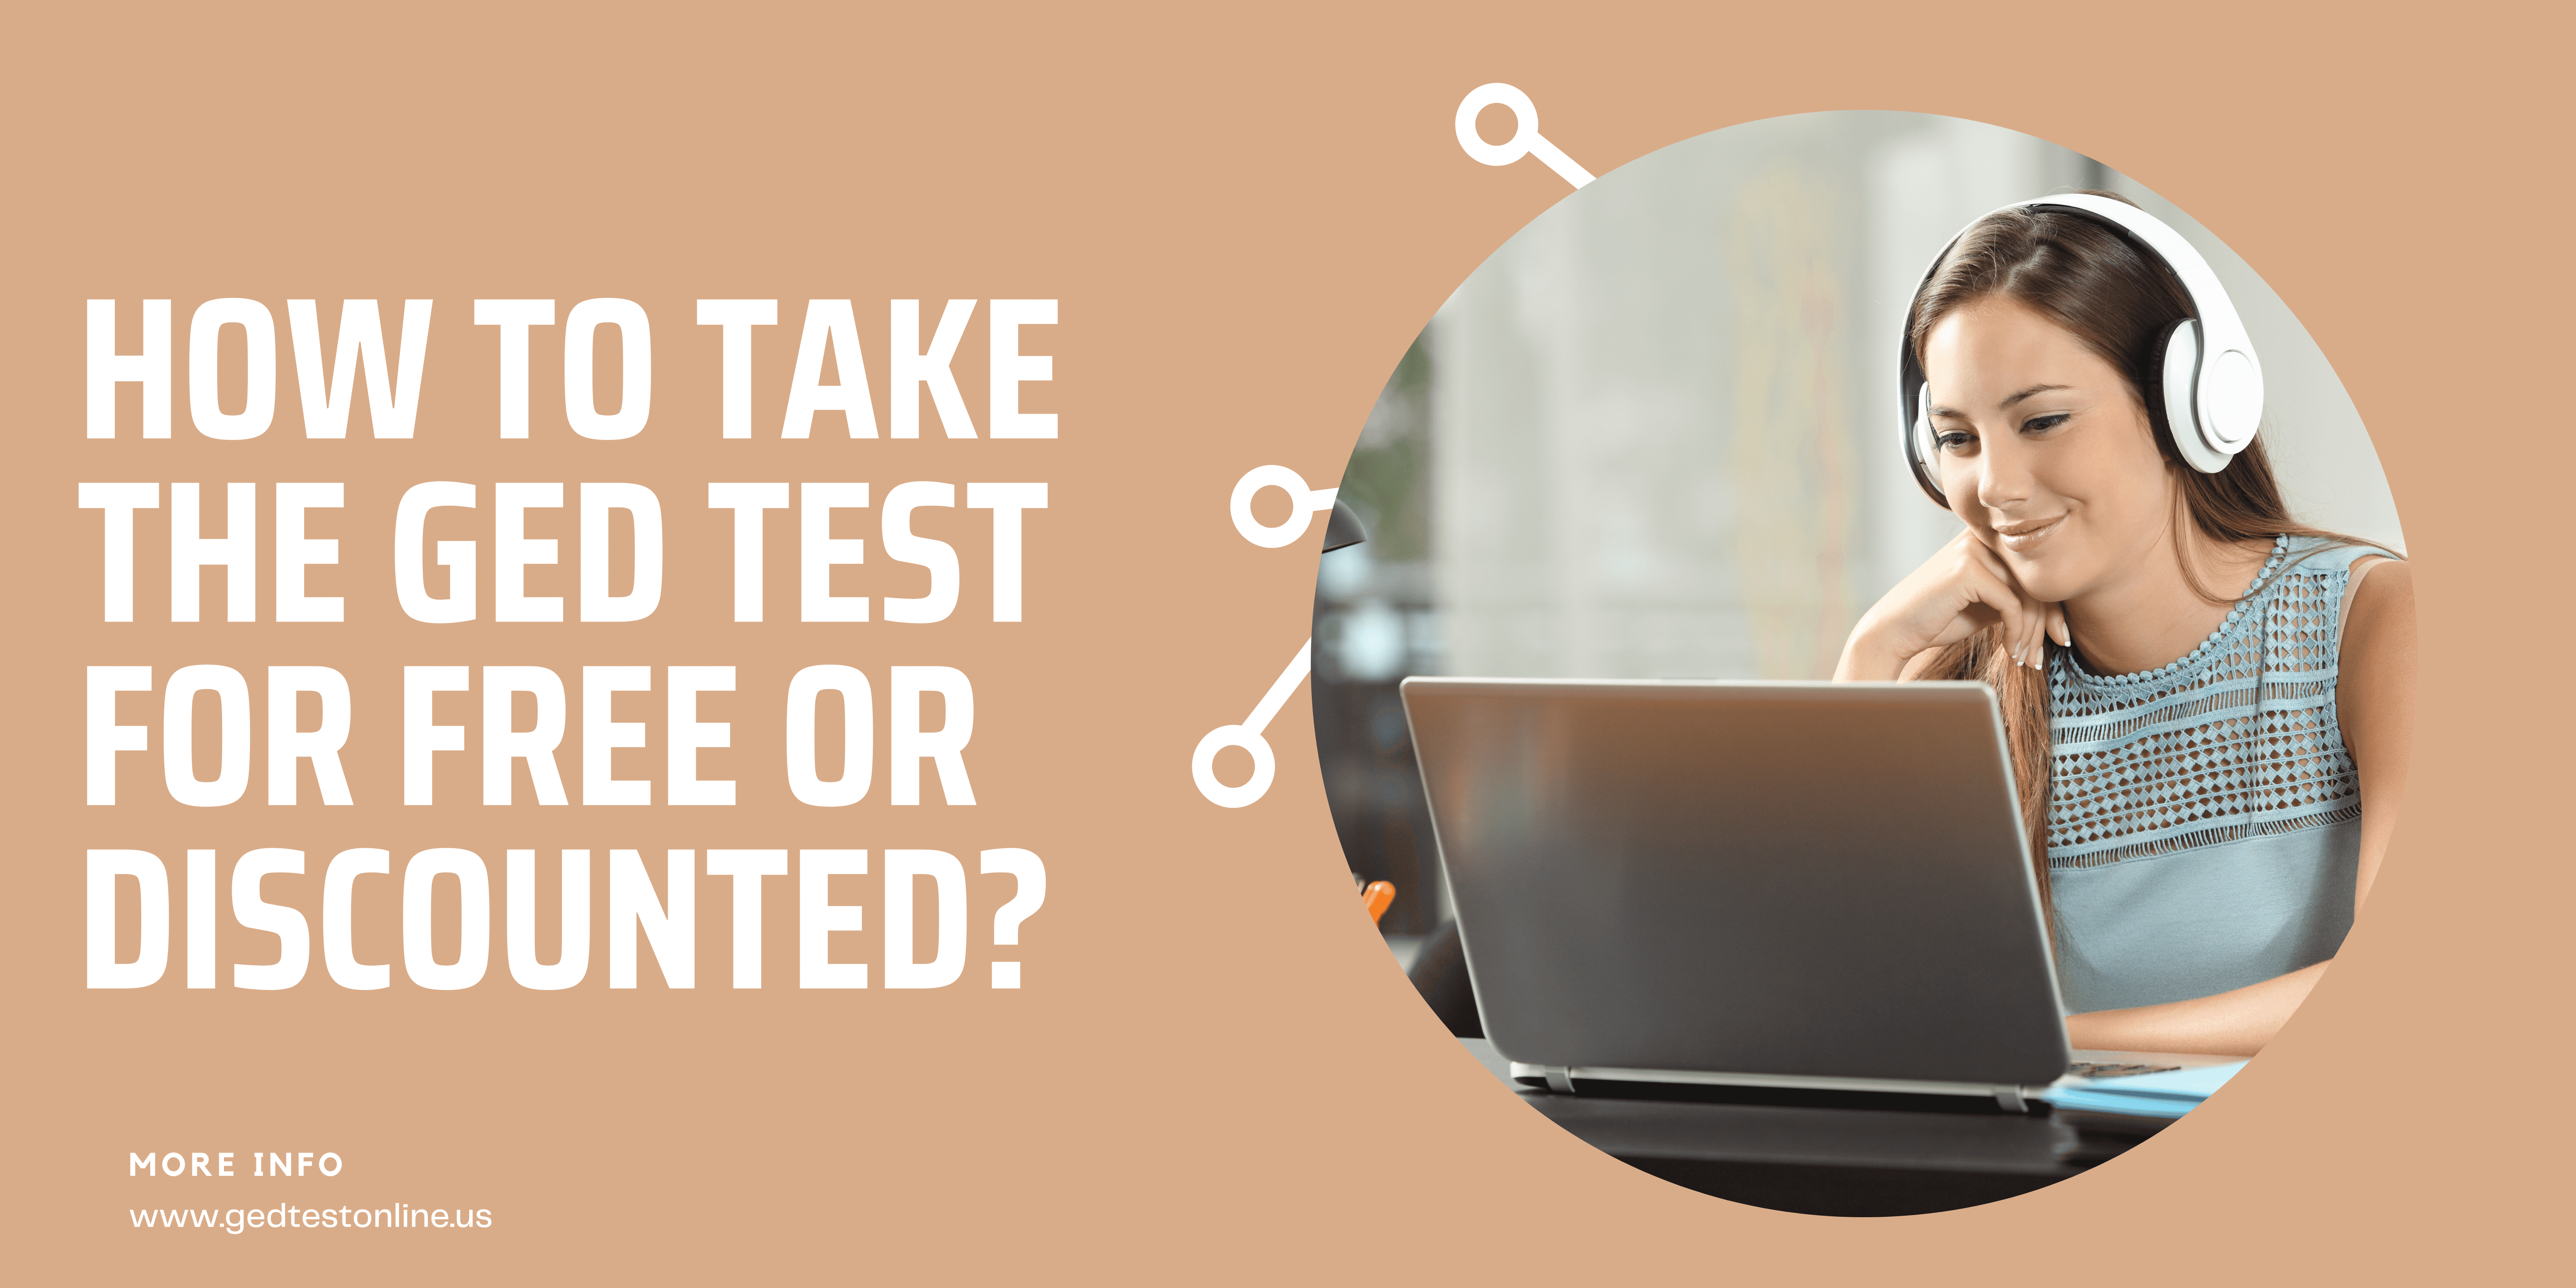 How to Take the GED Test for Free or Discounted? 